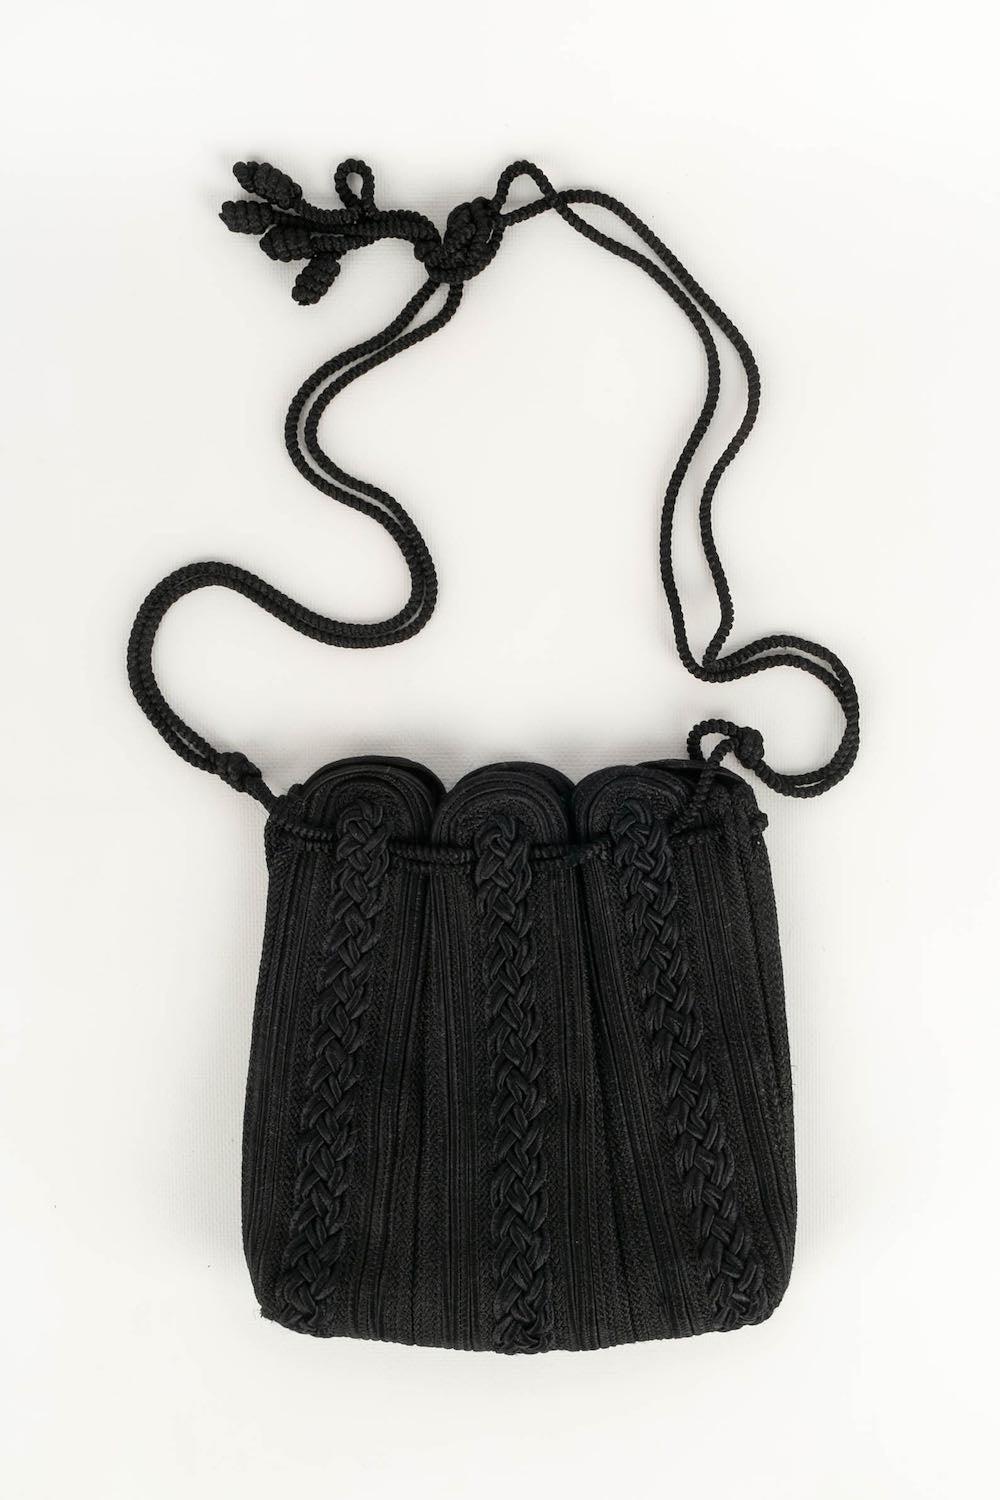 Nina Ricci -Purse bag in black passementerie.

Additional information: 
Dimensions: Height: 21 cm, Width: 20 cm, Handle: 93 cm
Condition: Very good condition
Seller Ref number: S121